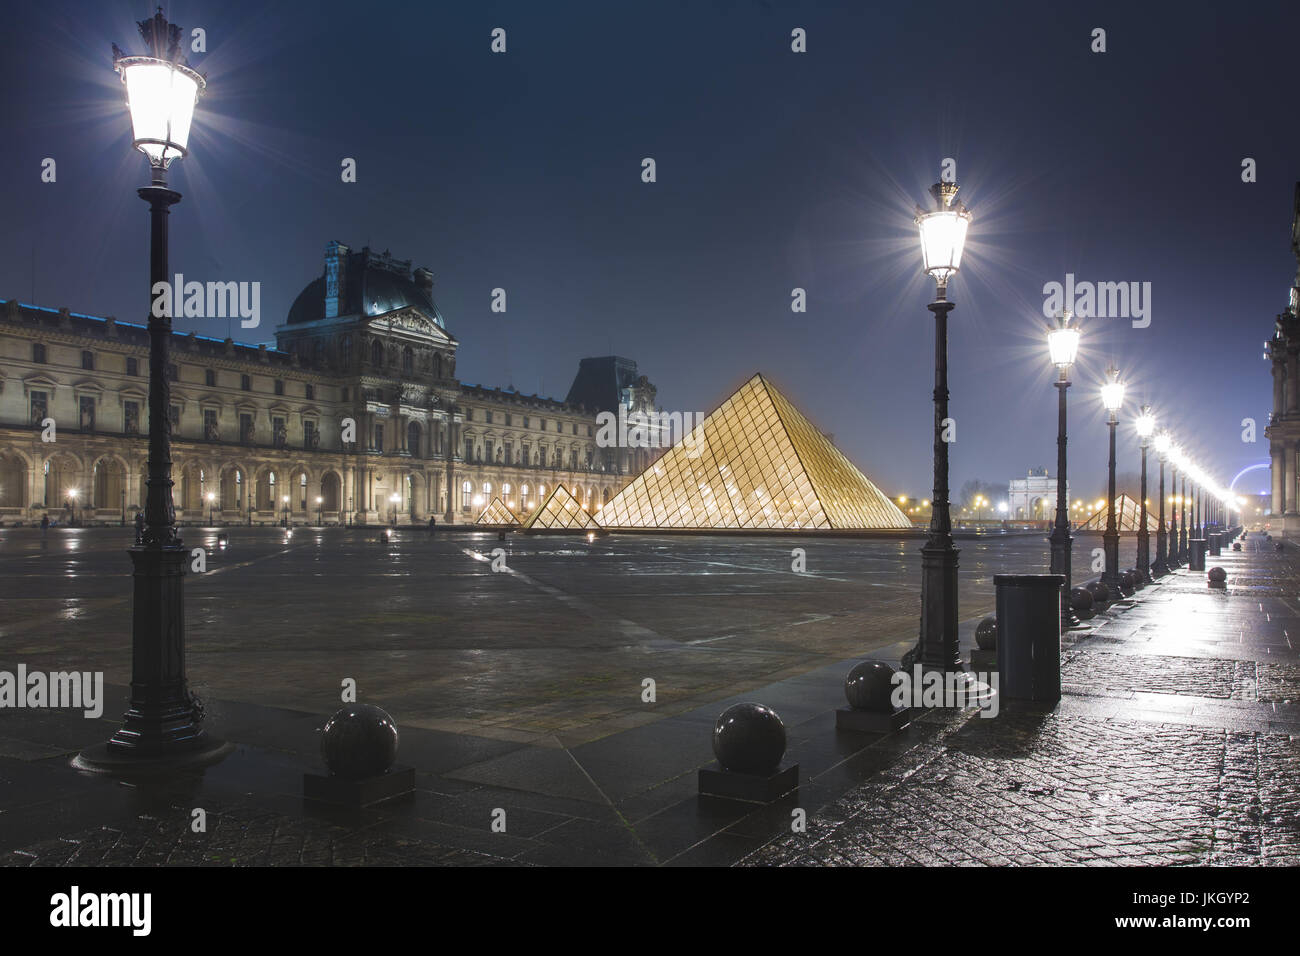 View of the Louvre Museum and the Pyramid, Paris, France Stock Photo